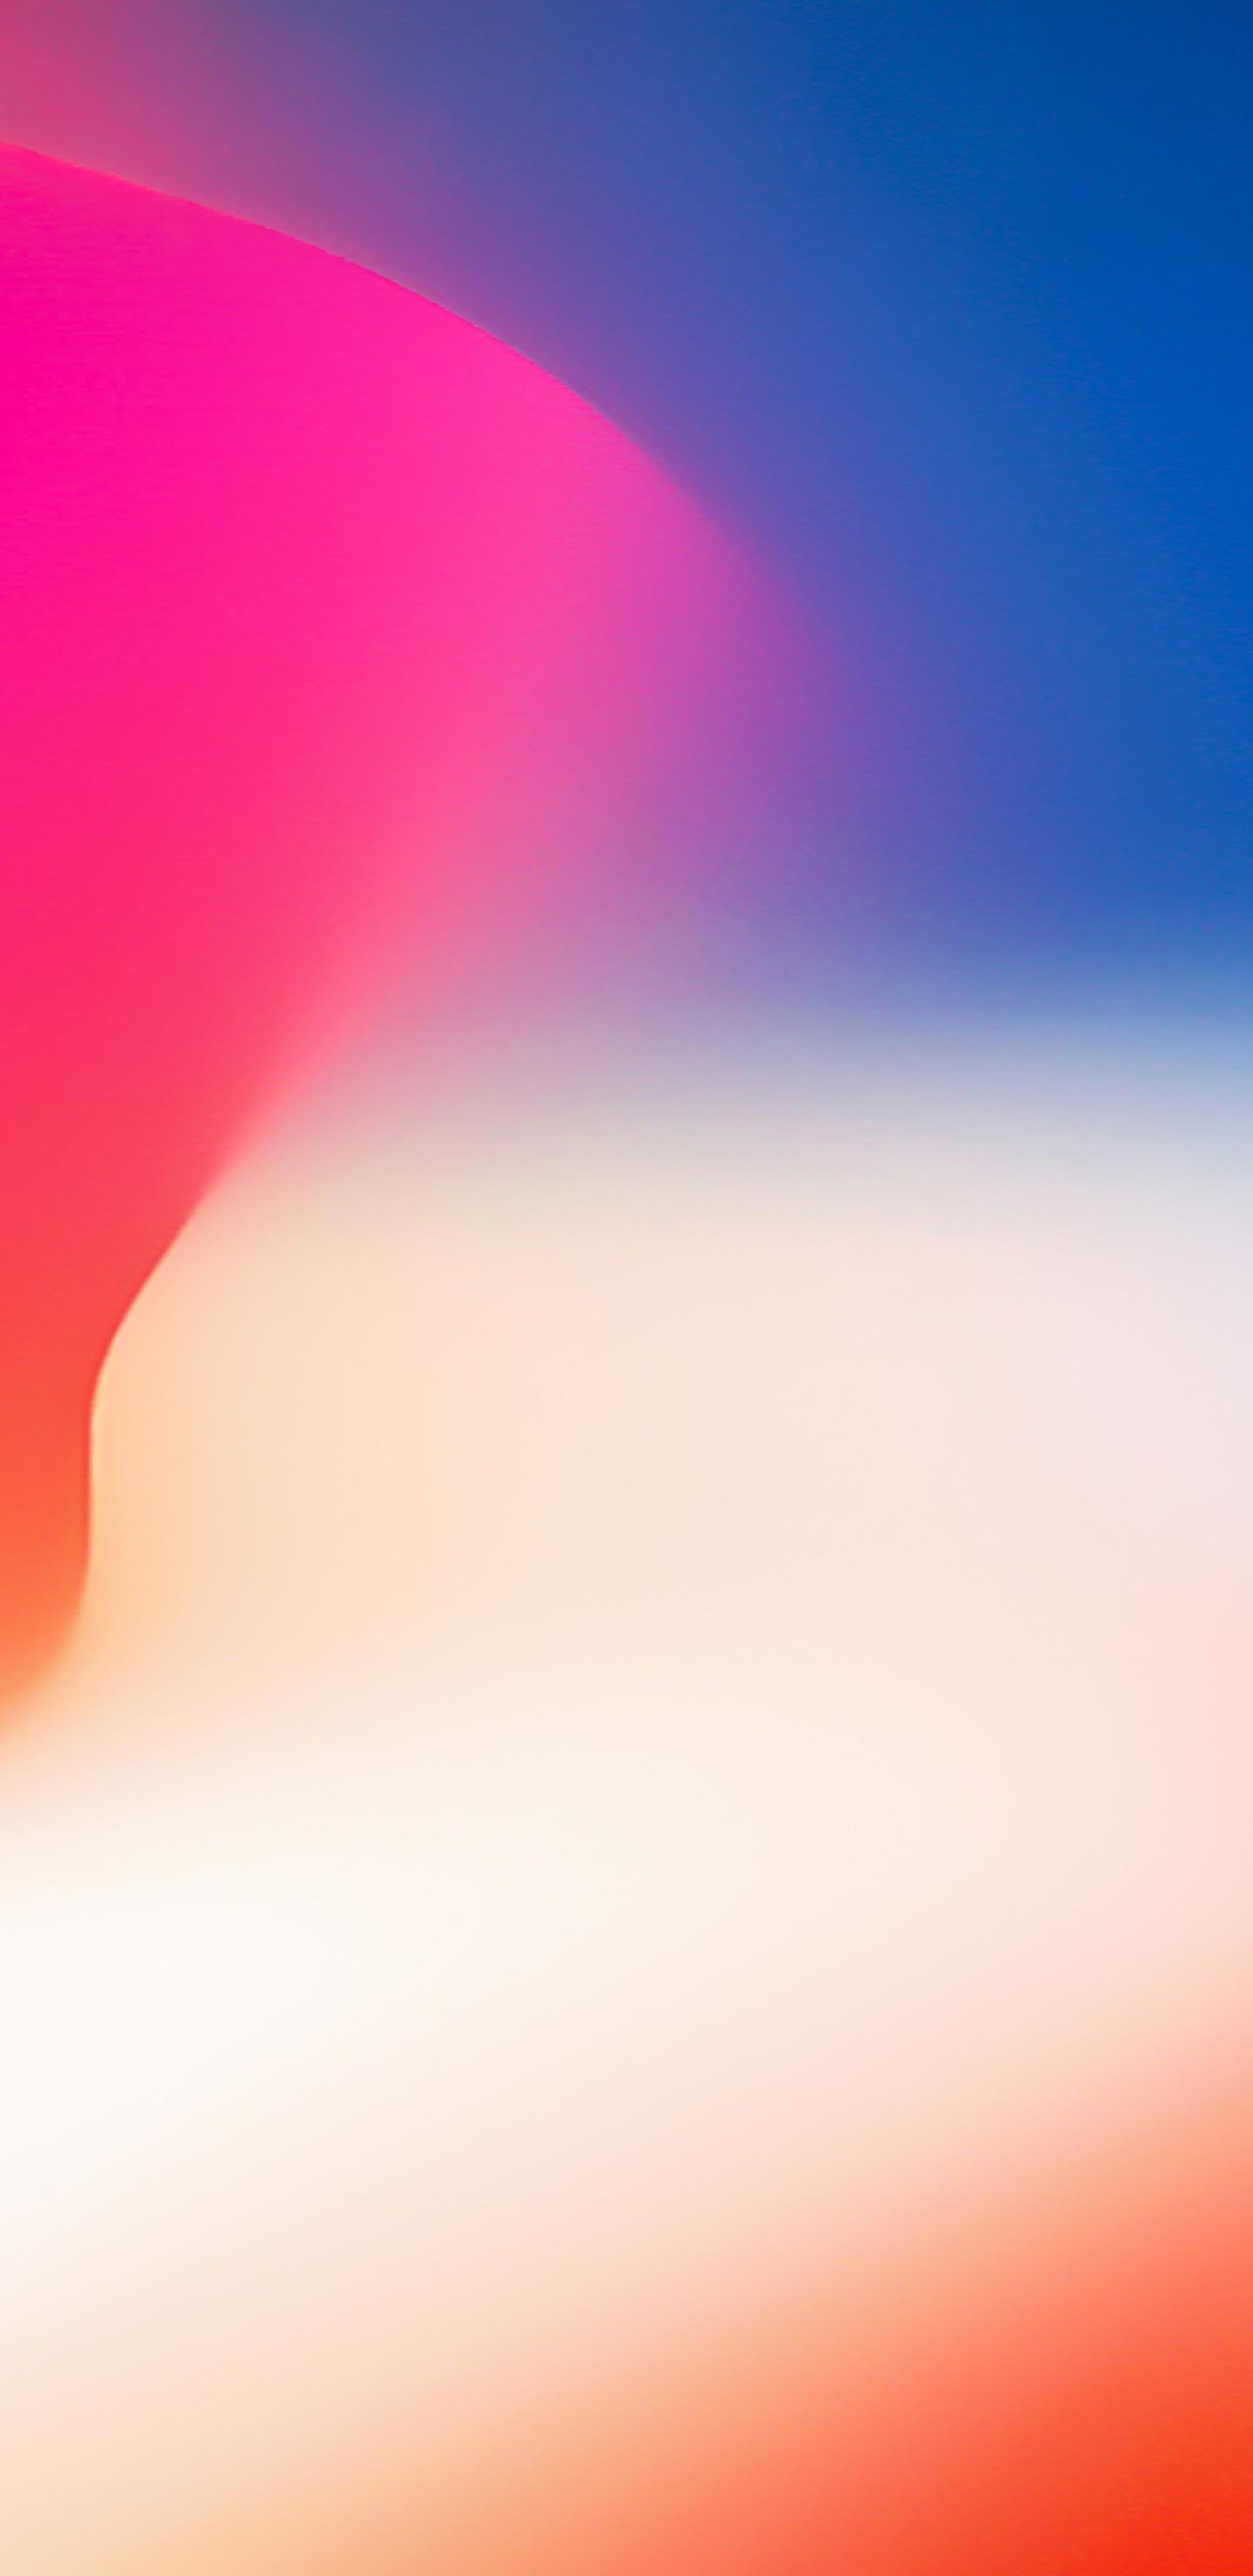 Download 1440x2960 wallpaper iphone x, stock, colorful gradient